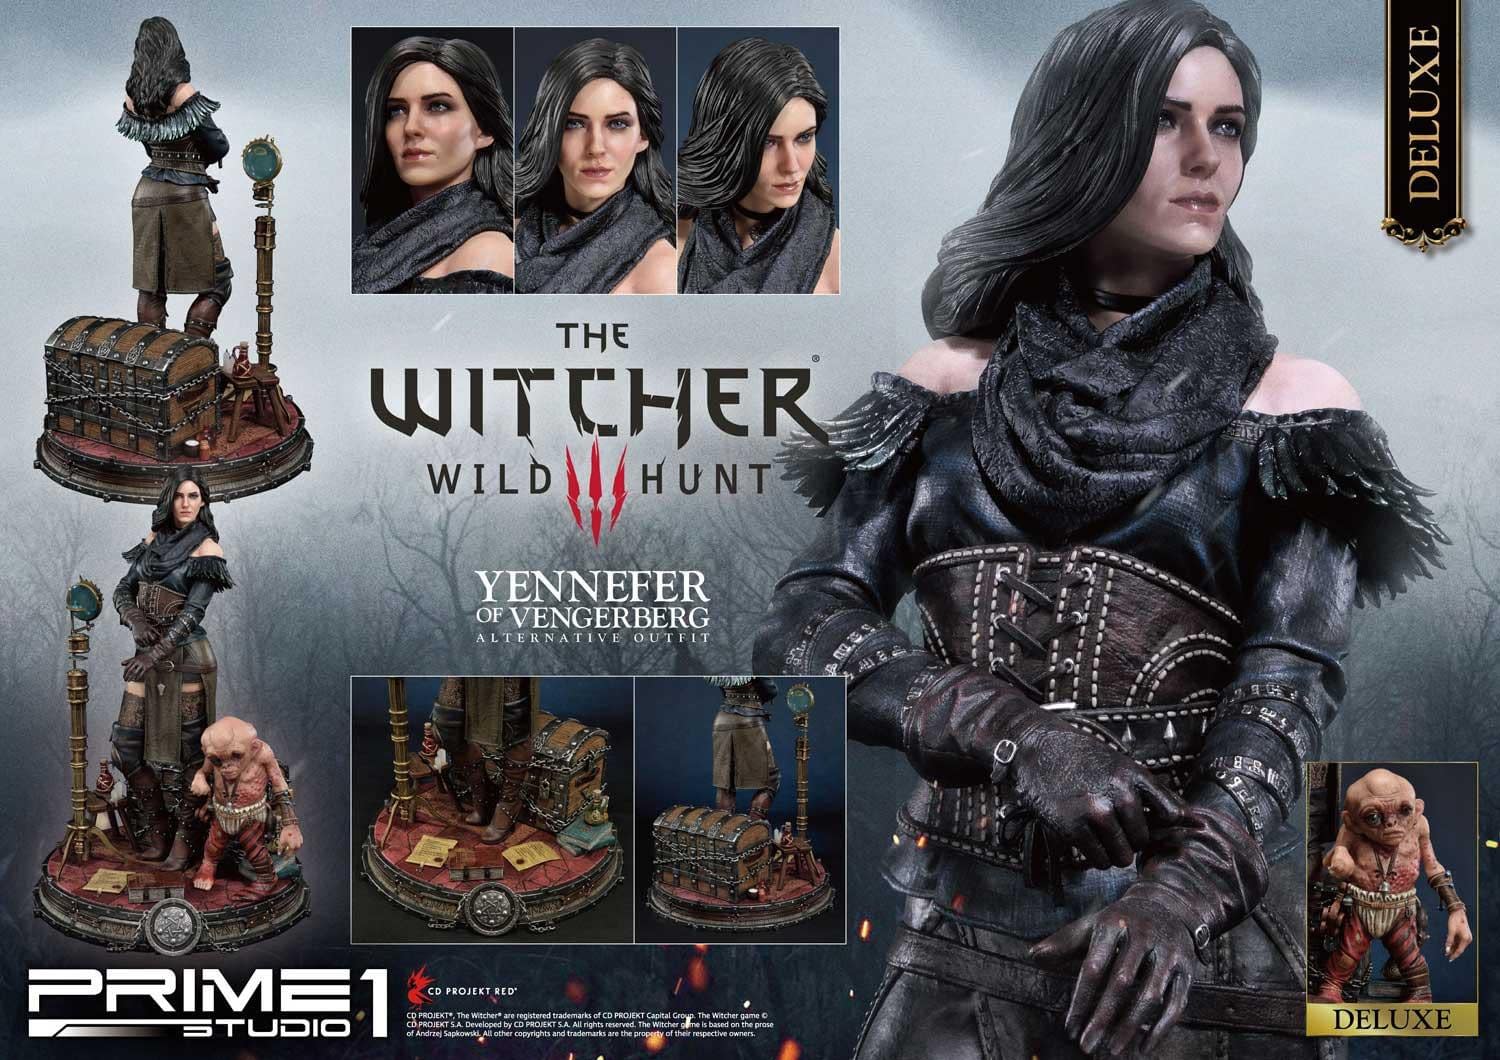 The Witcher 3 Yennefer Gets a Prime 1 Studio Statue